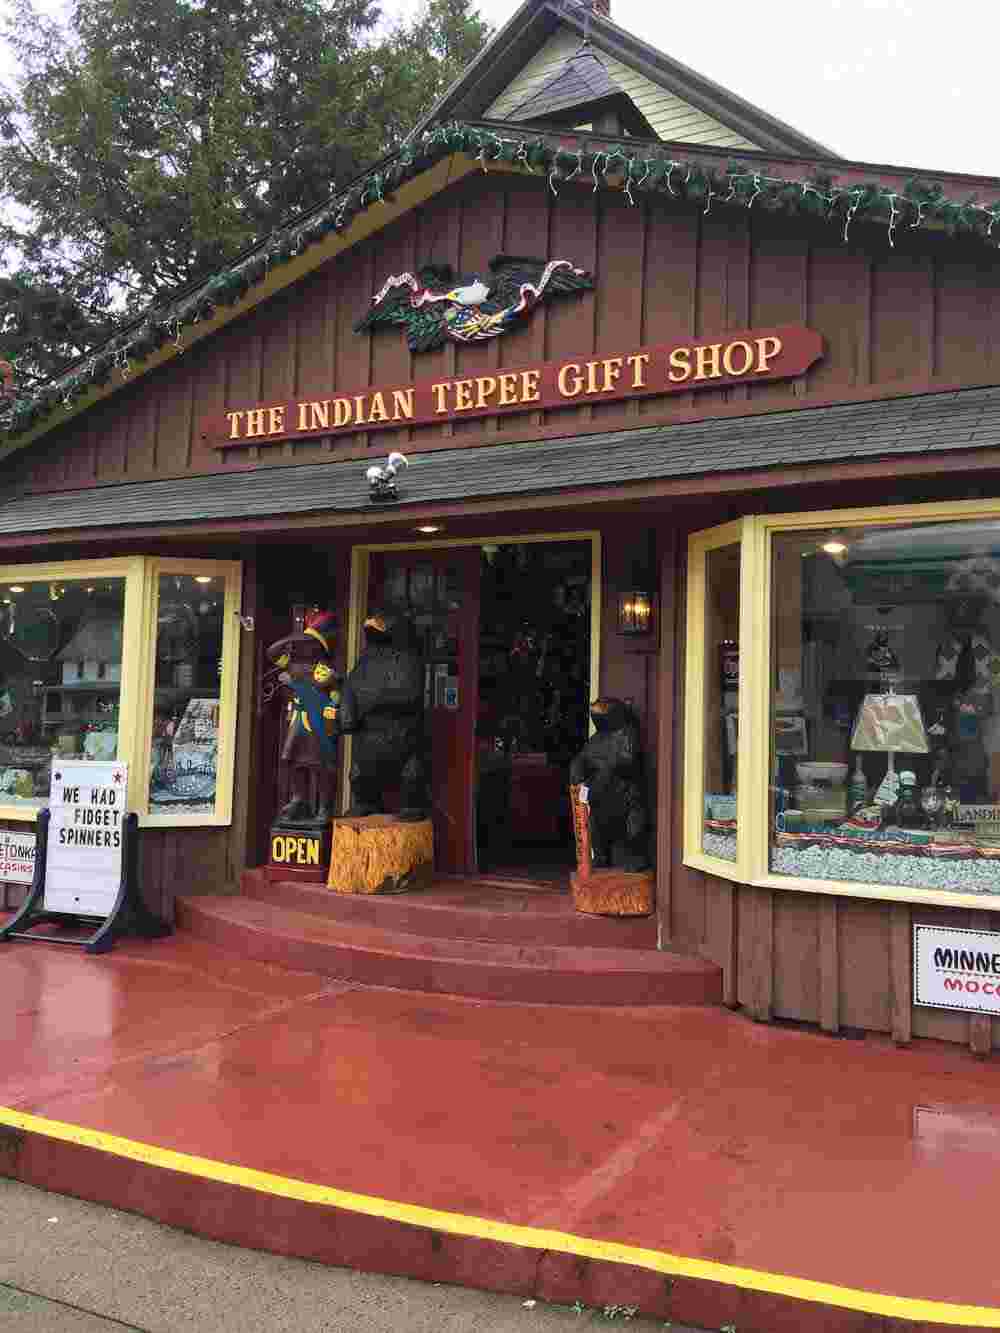 An exterior view of the Indian Tepee Gift Shop.